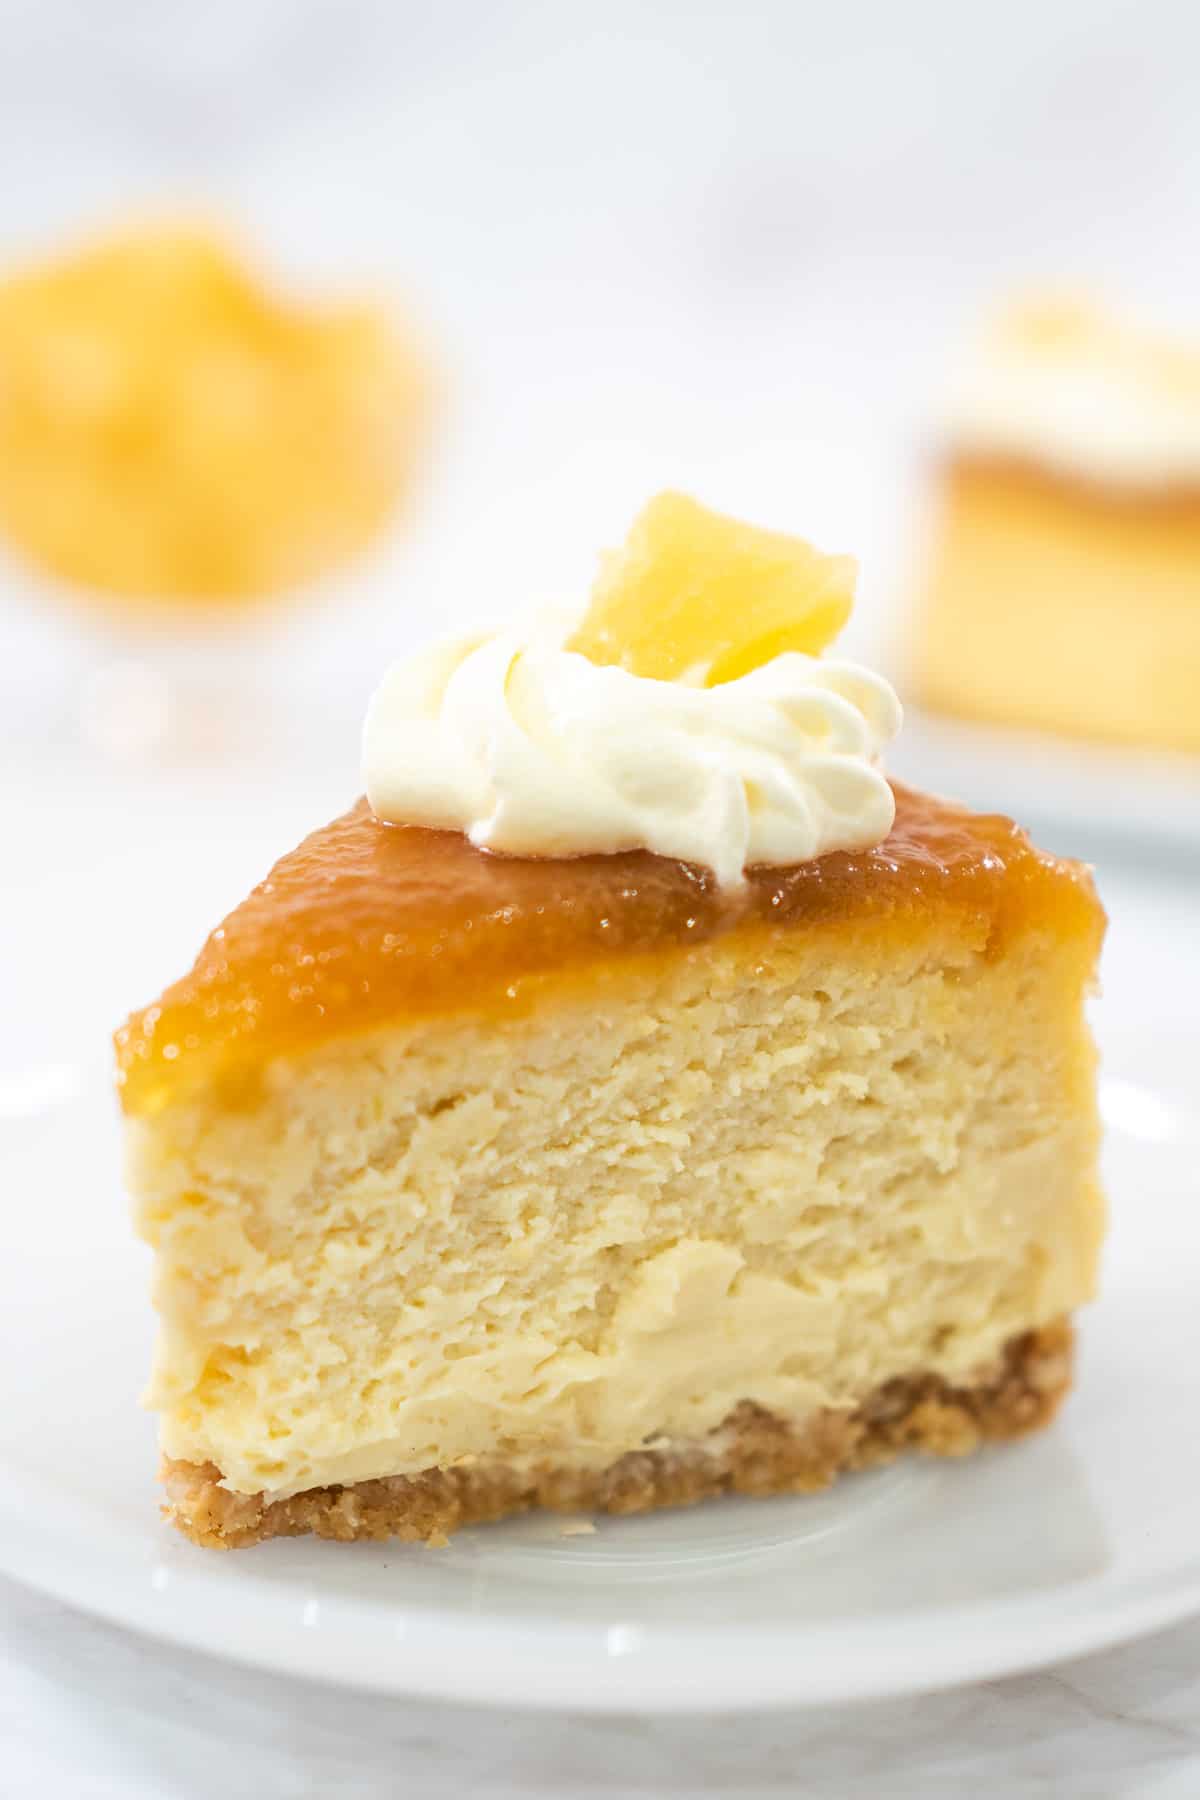 A slice of cheesecake with pineapple topping and whipped cream